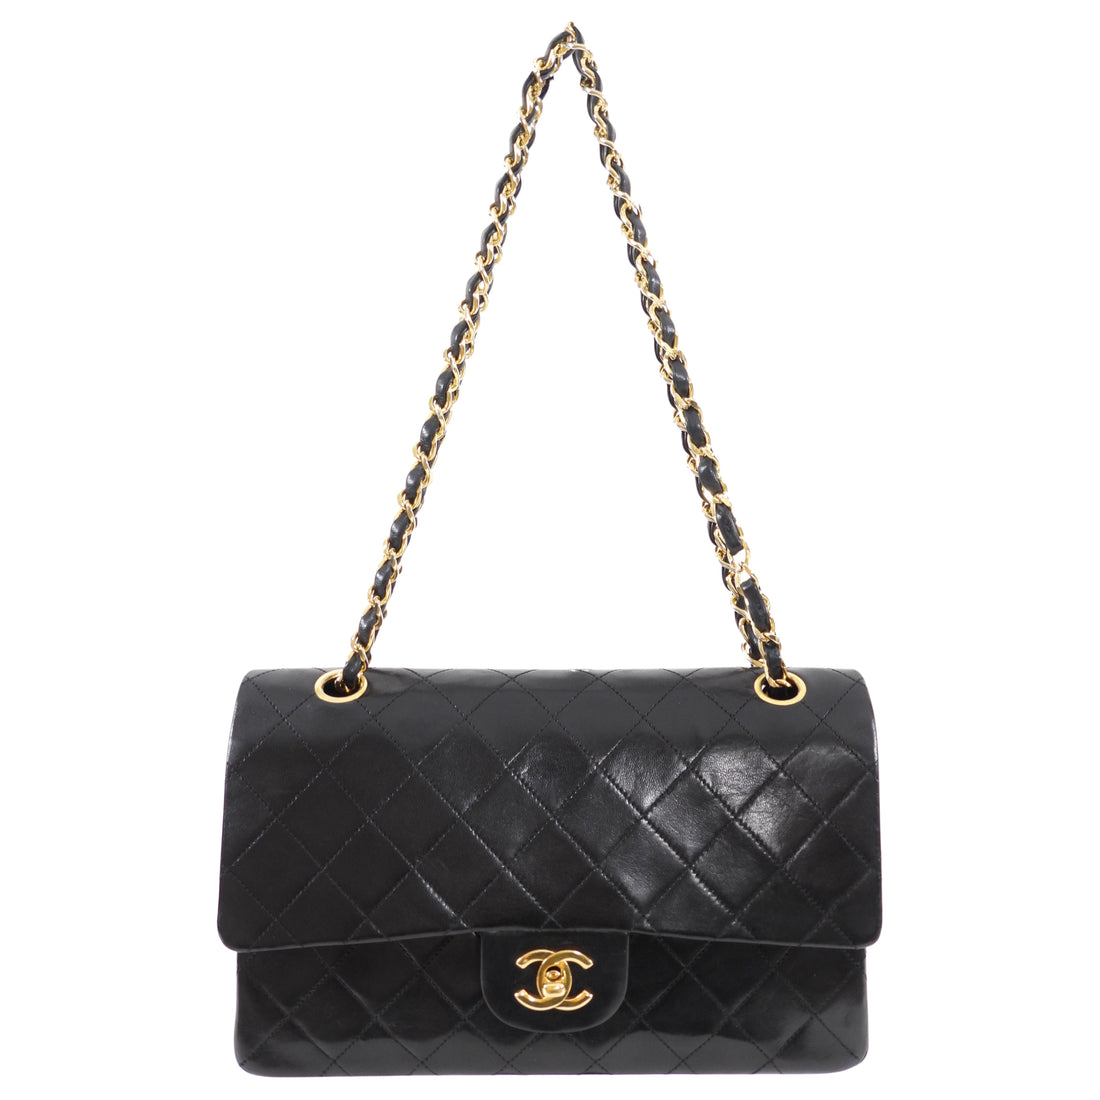 Buy Authentic, Preloved Chanel Vintage Quilted Lambskin Medium